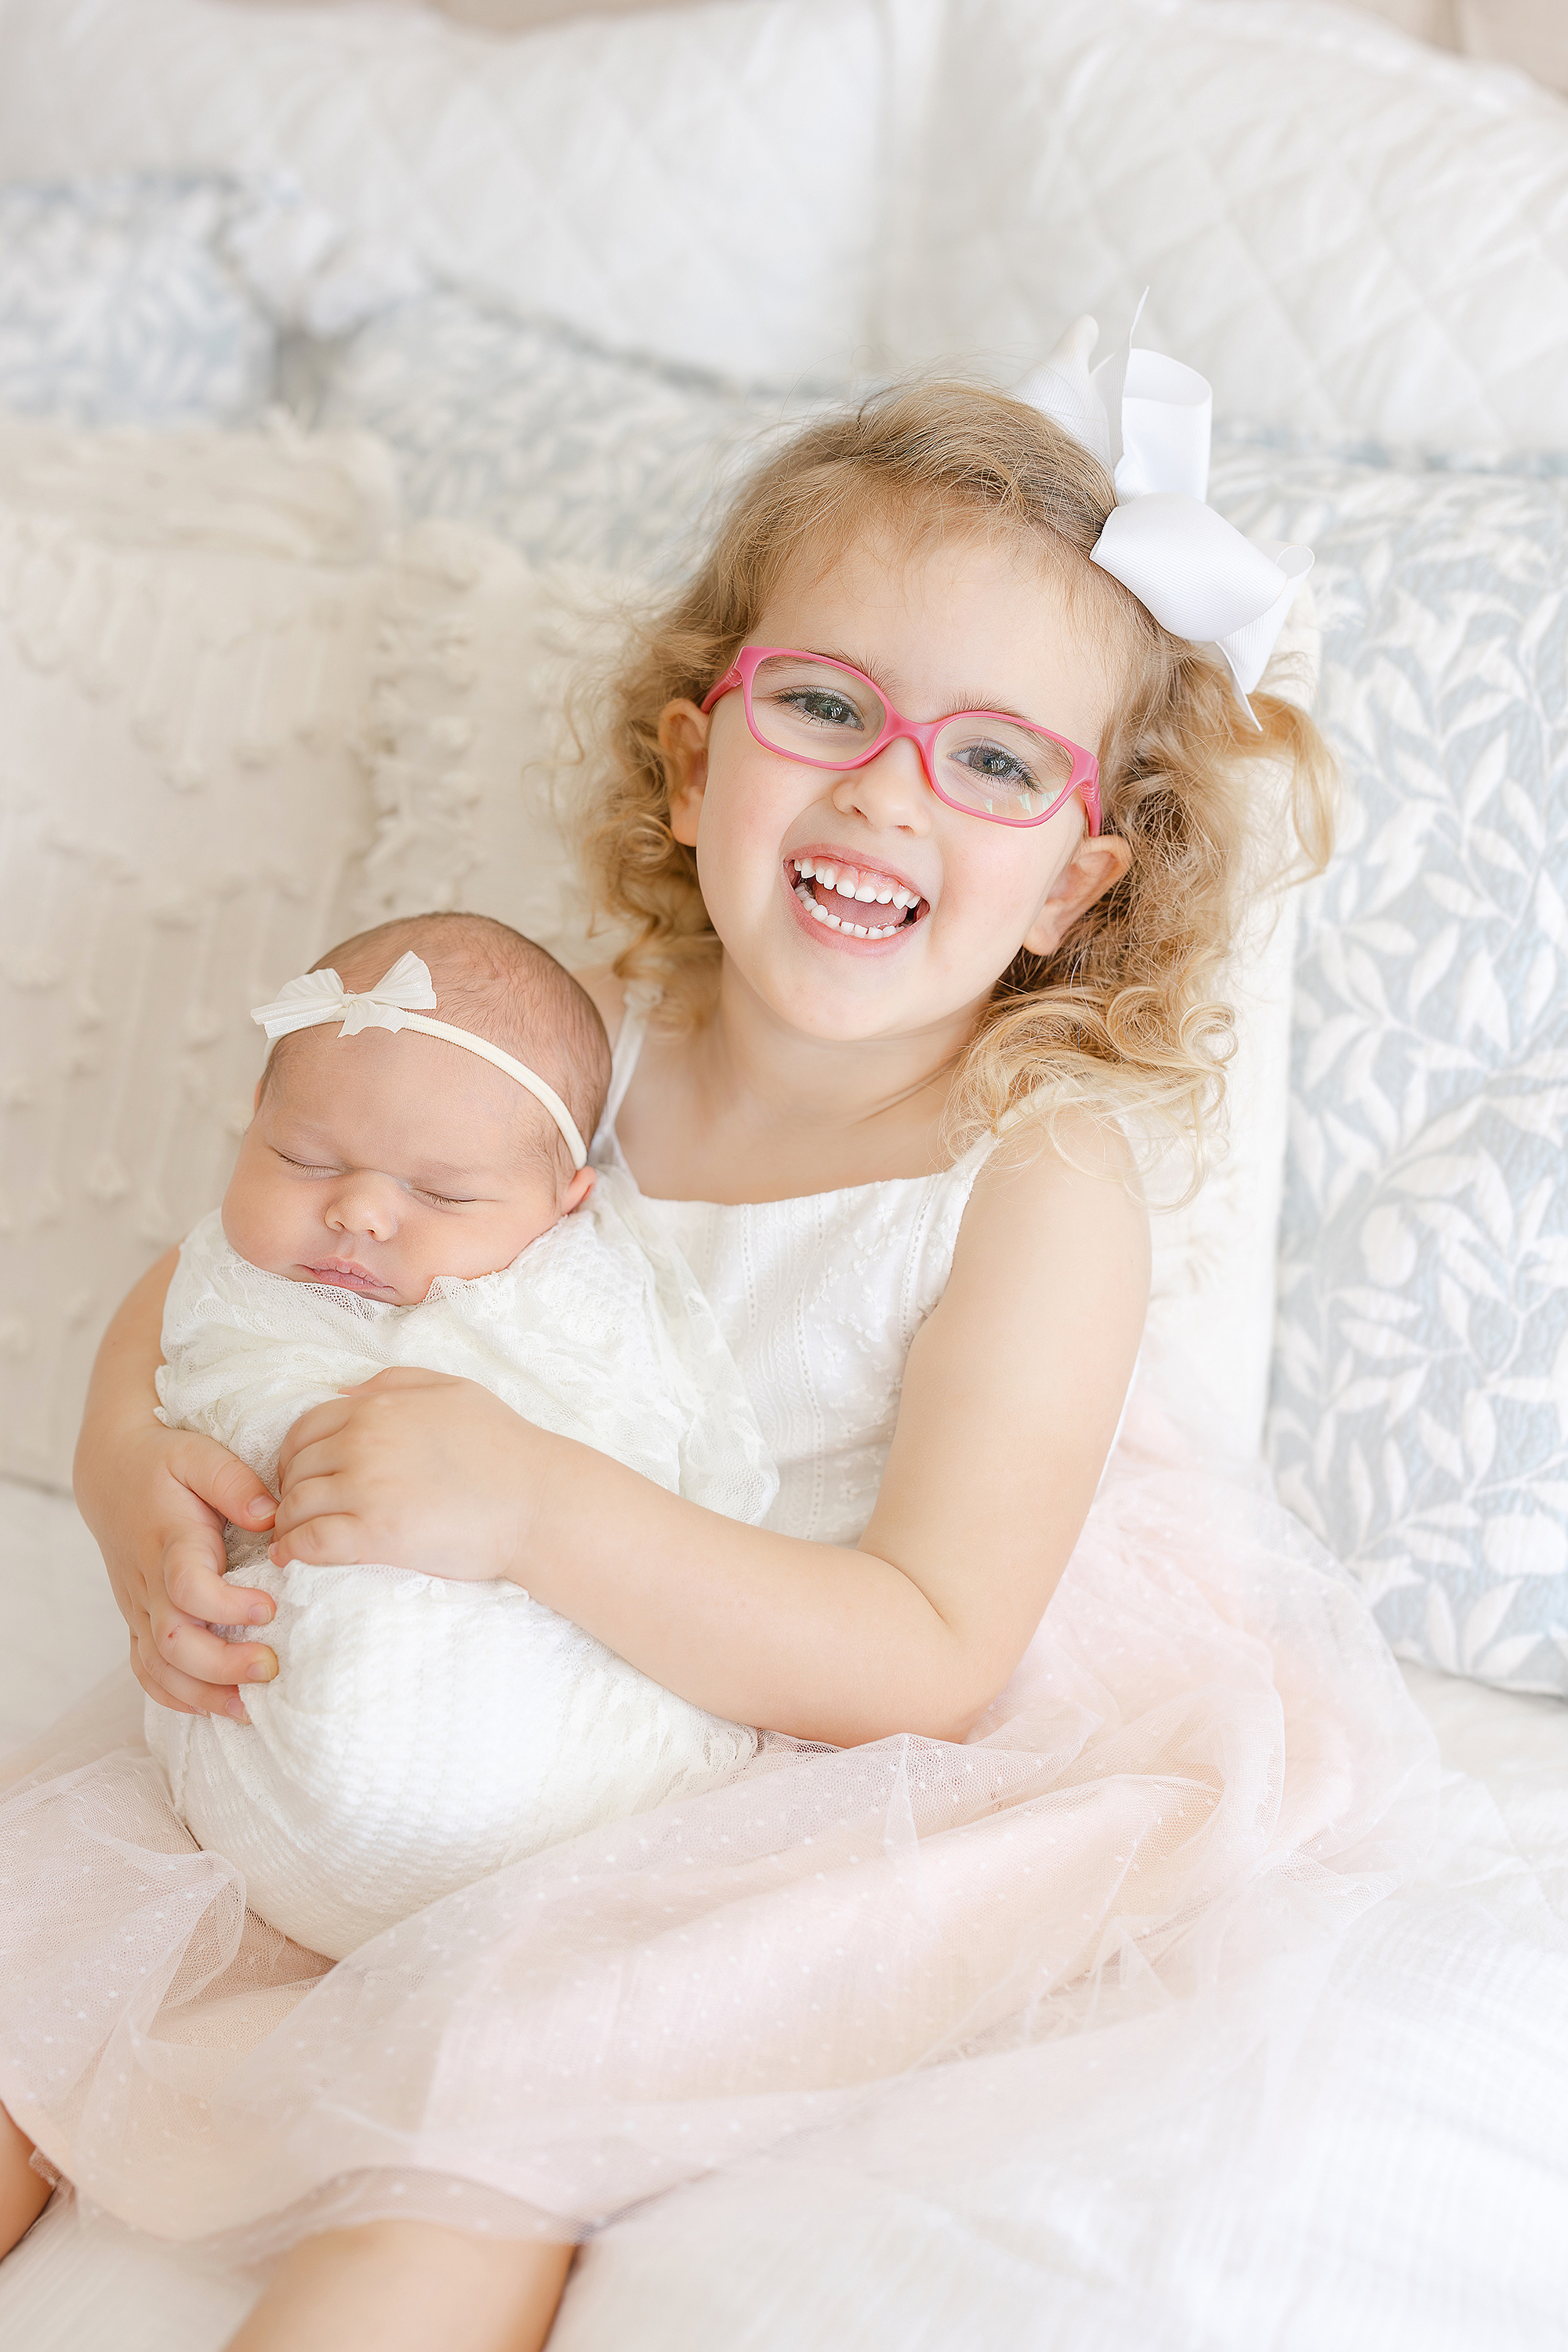 A sibling portrait of a little girl in hot pink glasses holding her newborn baby sister.